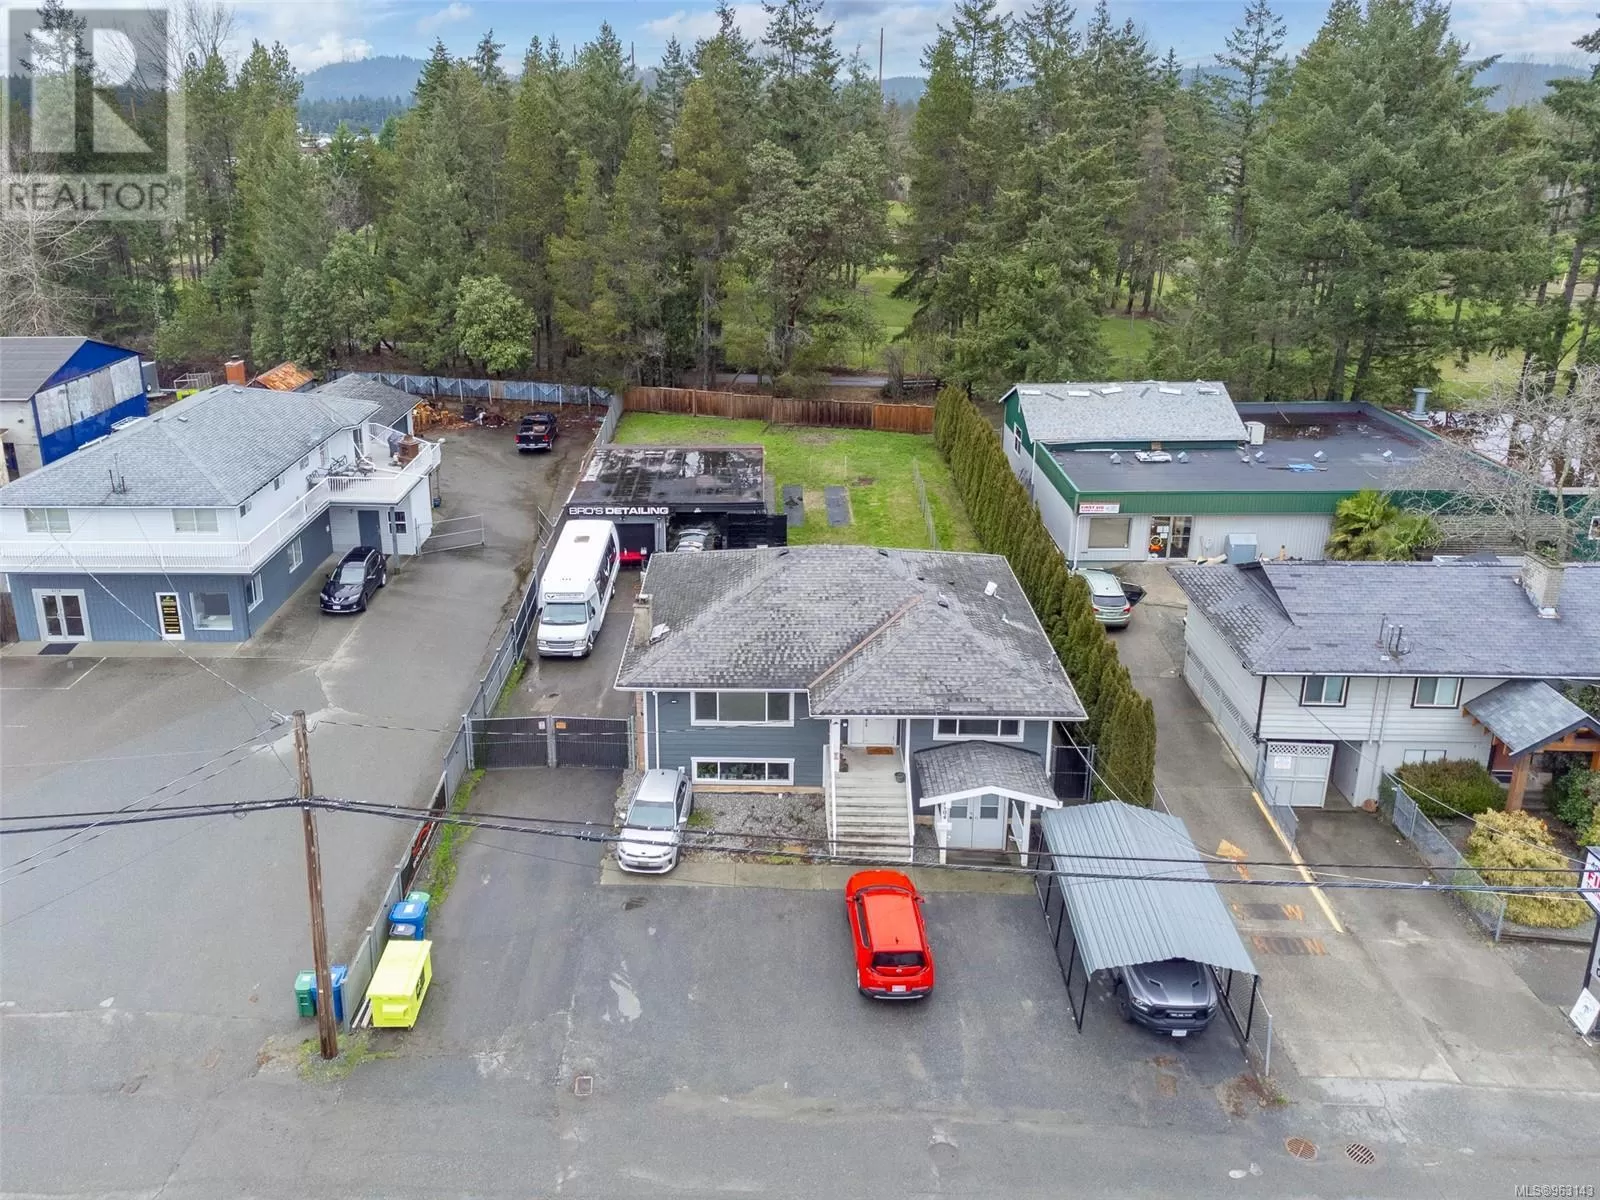 Commercial Mix for rent: 2104 Northfield Rd, Nanaimo, British Columbia V9S 3B9